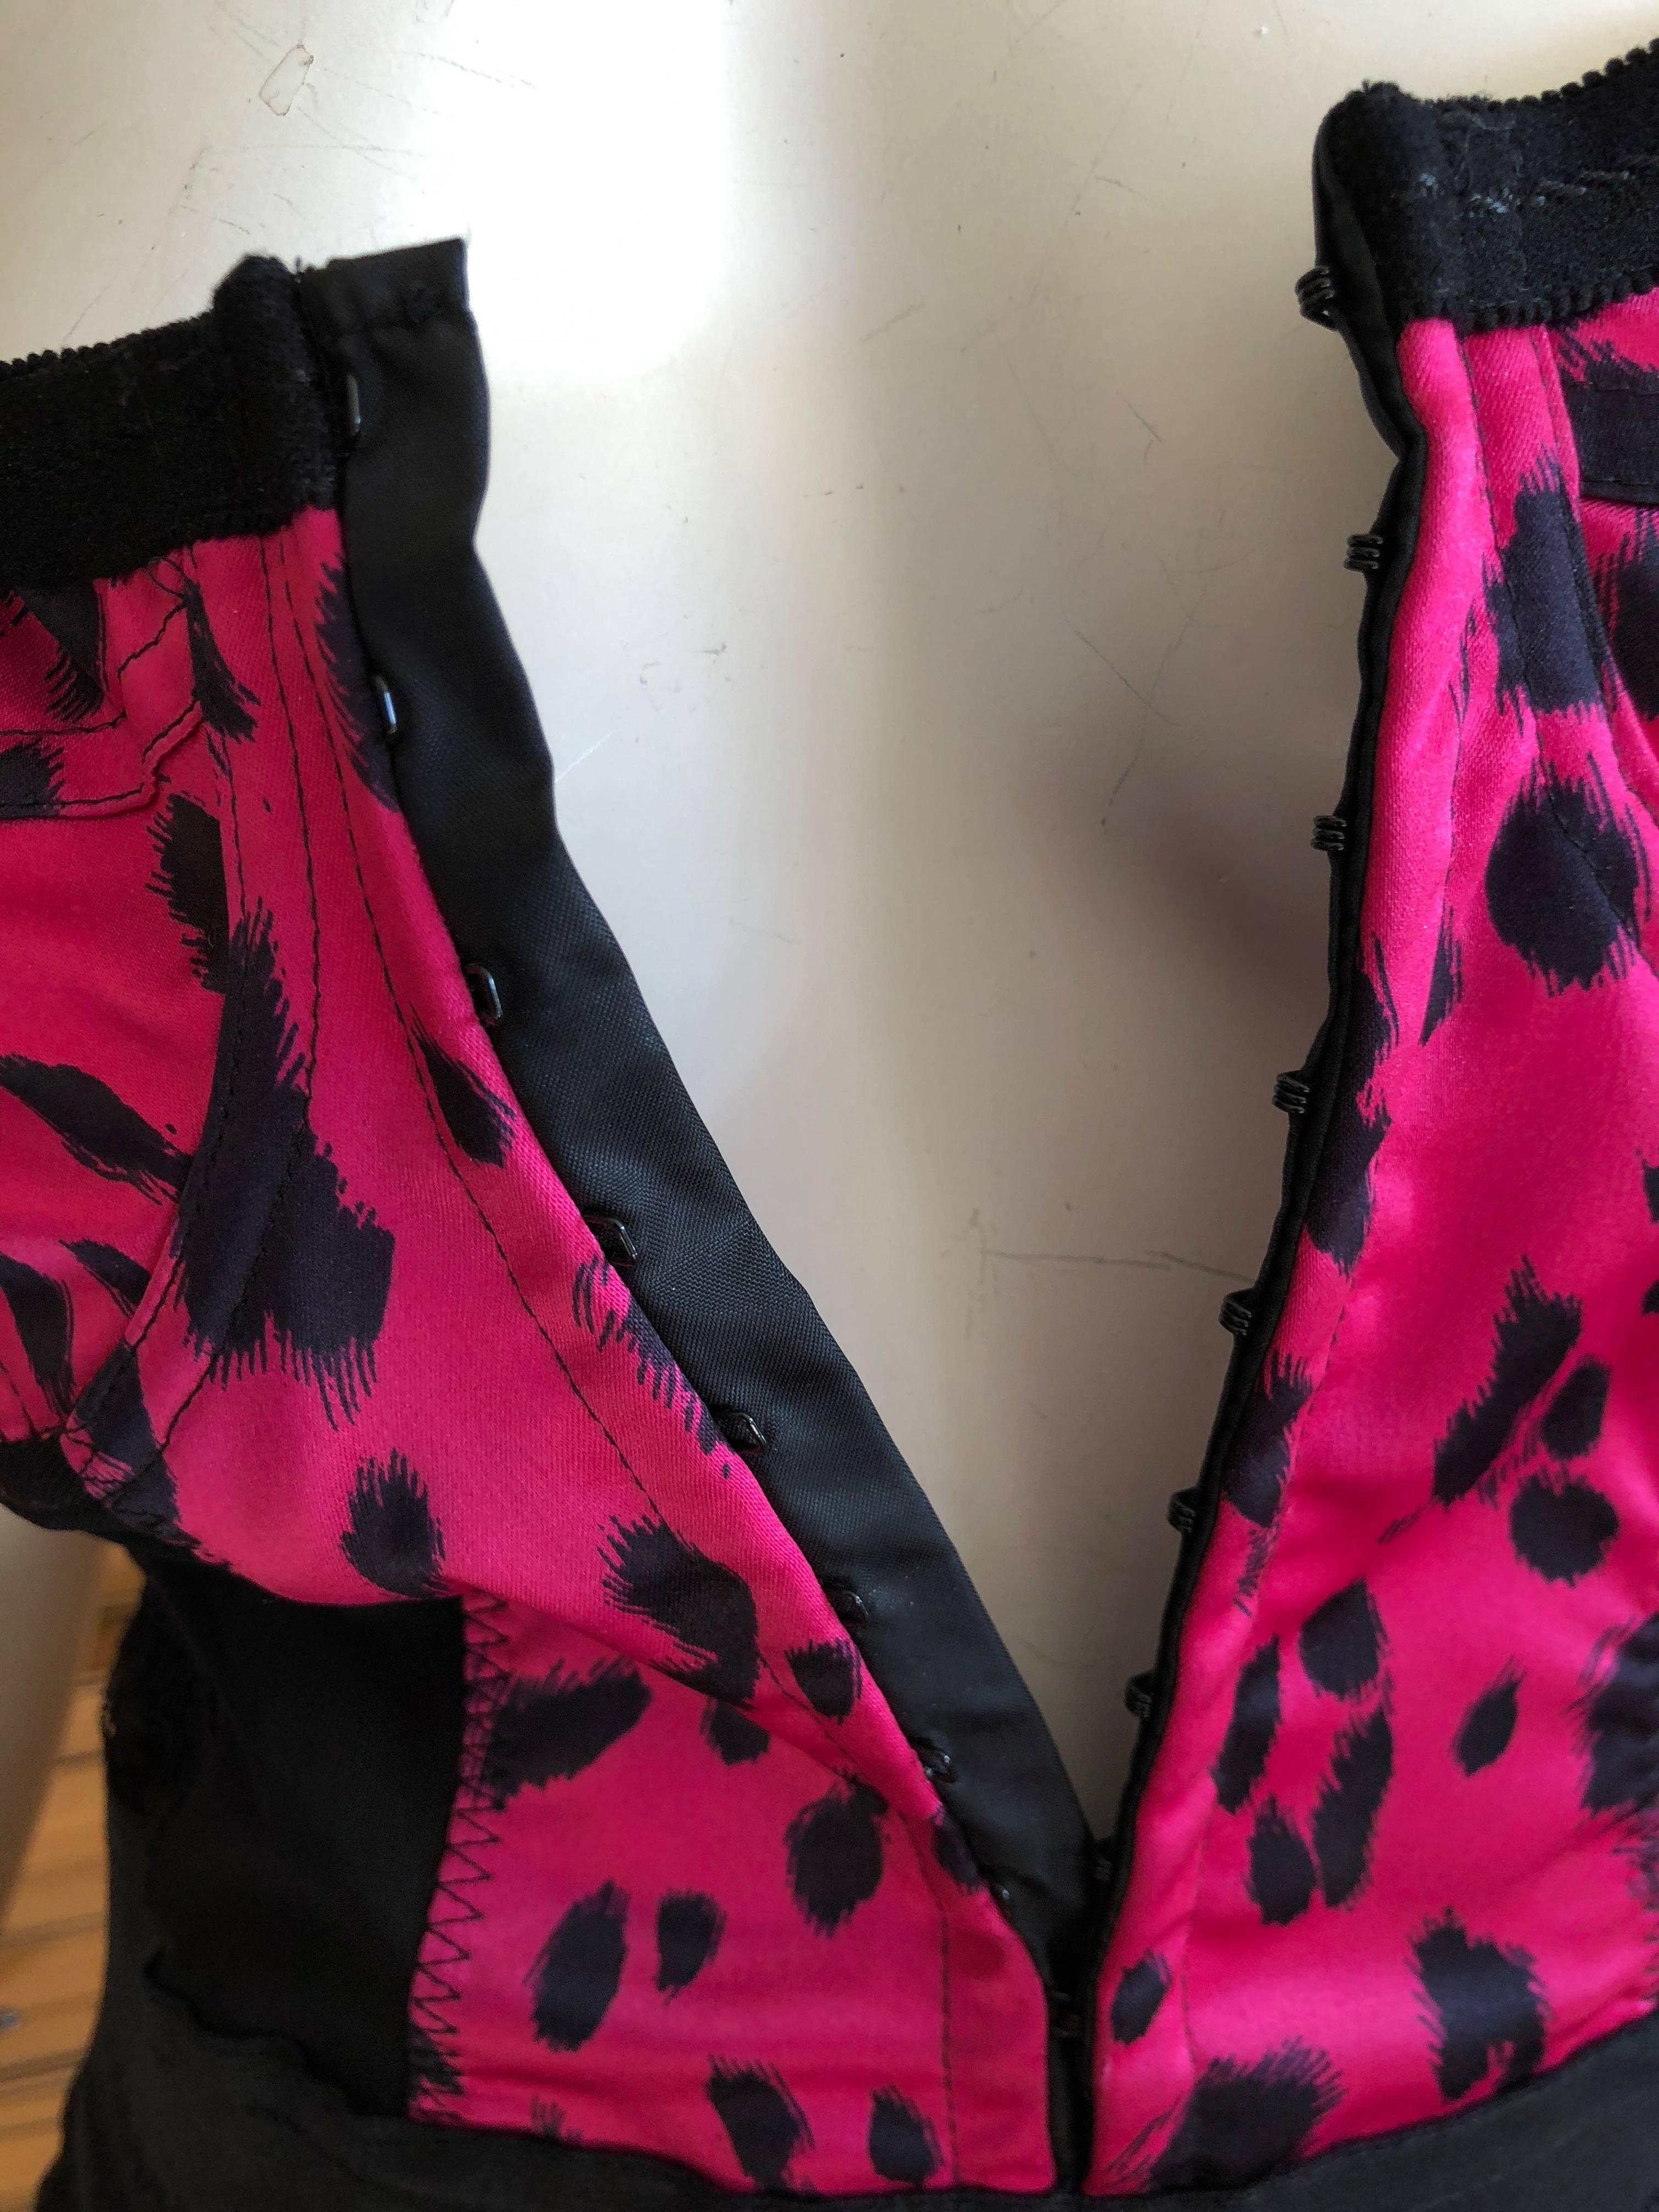 D&G Dolce & Gabanna Leopard Print Dress  In Excellent Condition For Sale In Cloverdale, CA